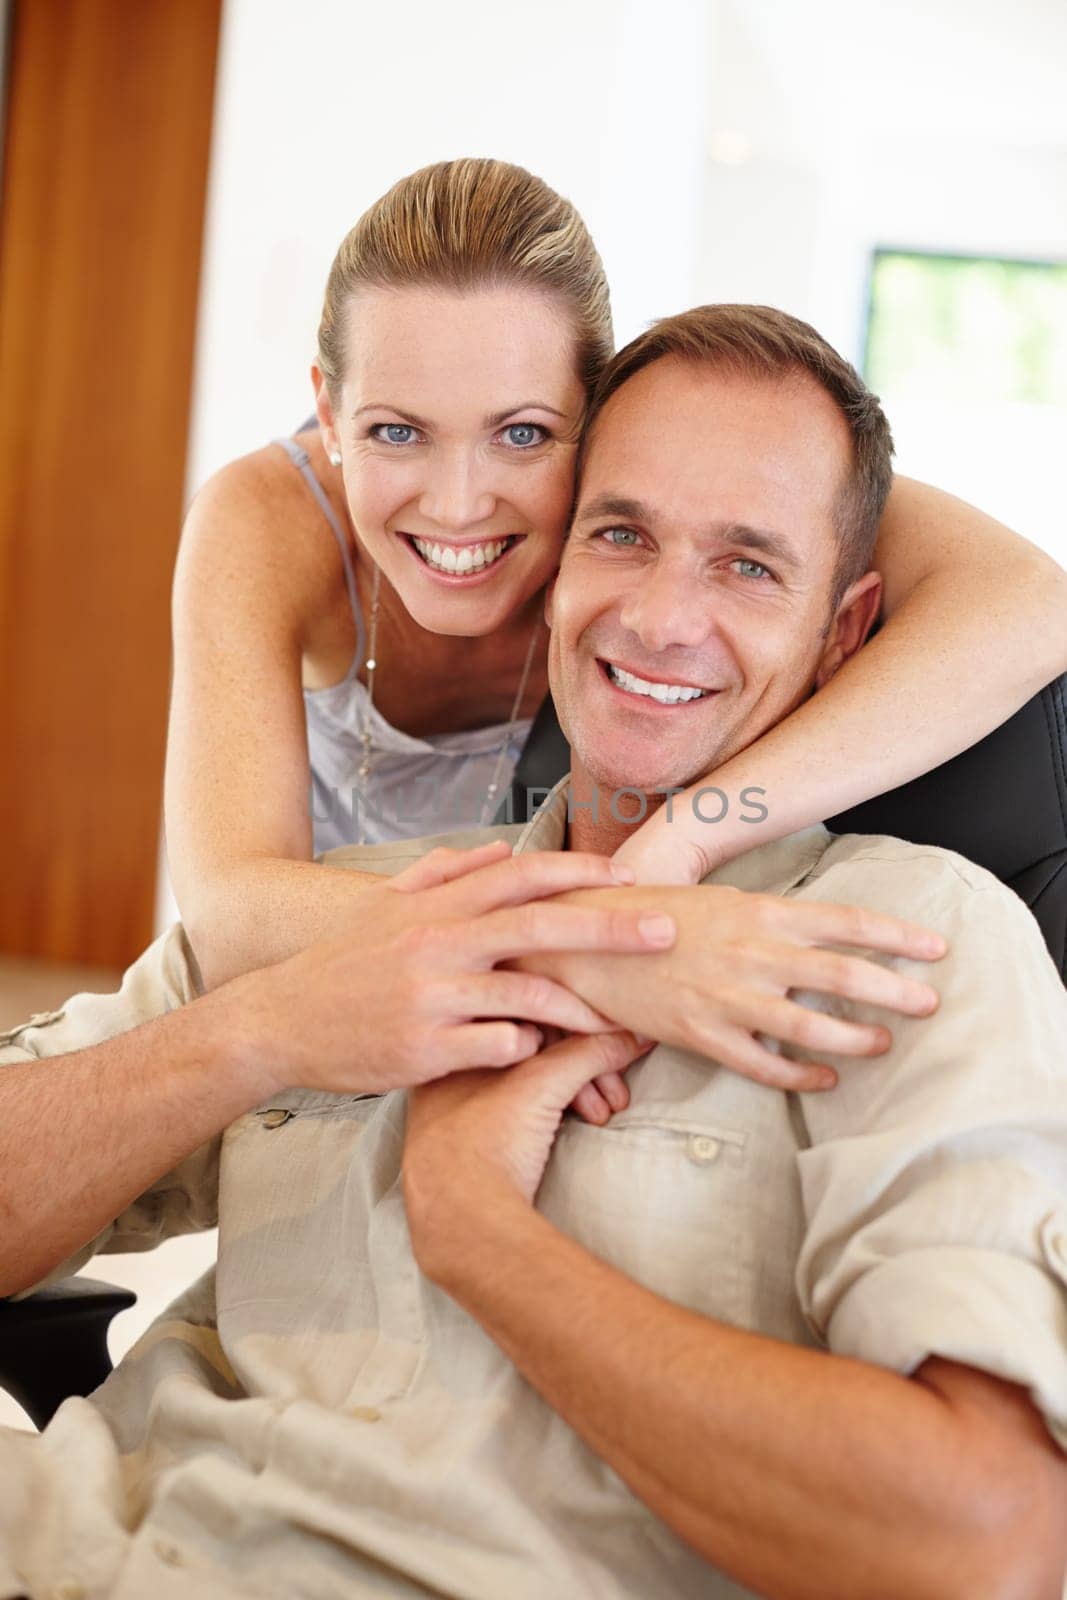 Smile, portrait and couple in embrace for marriage, love and proud of relationship milestone in home. Happy, hugging and people for support or care, romance and bonding in apartment for enjoyment.